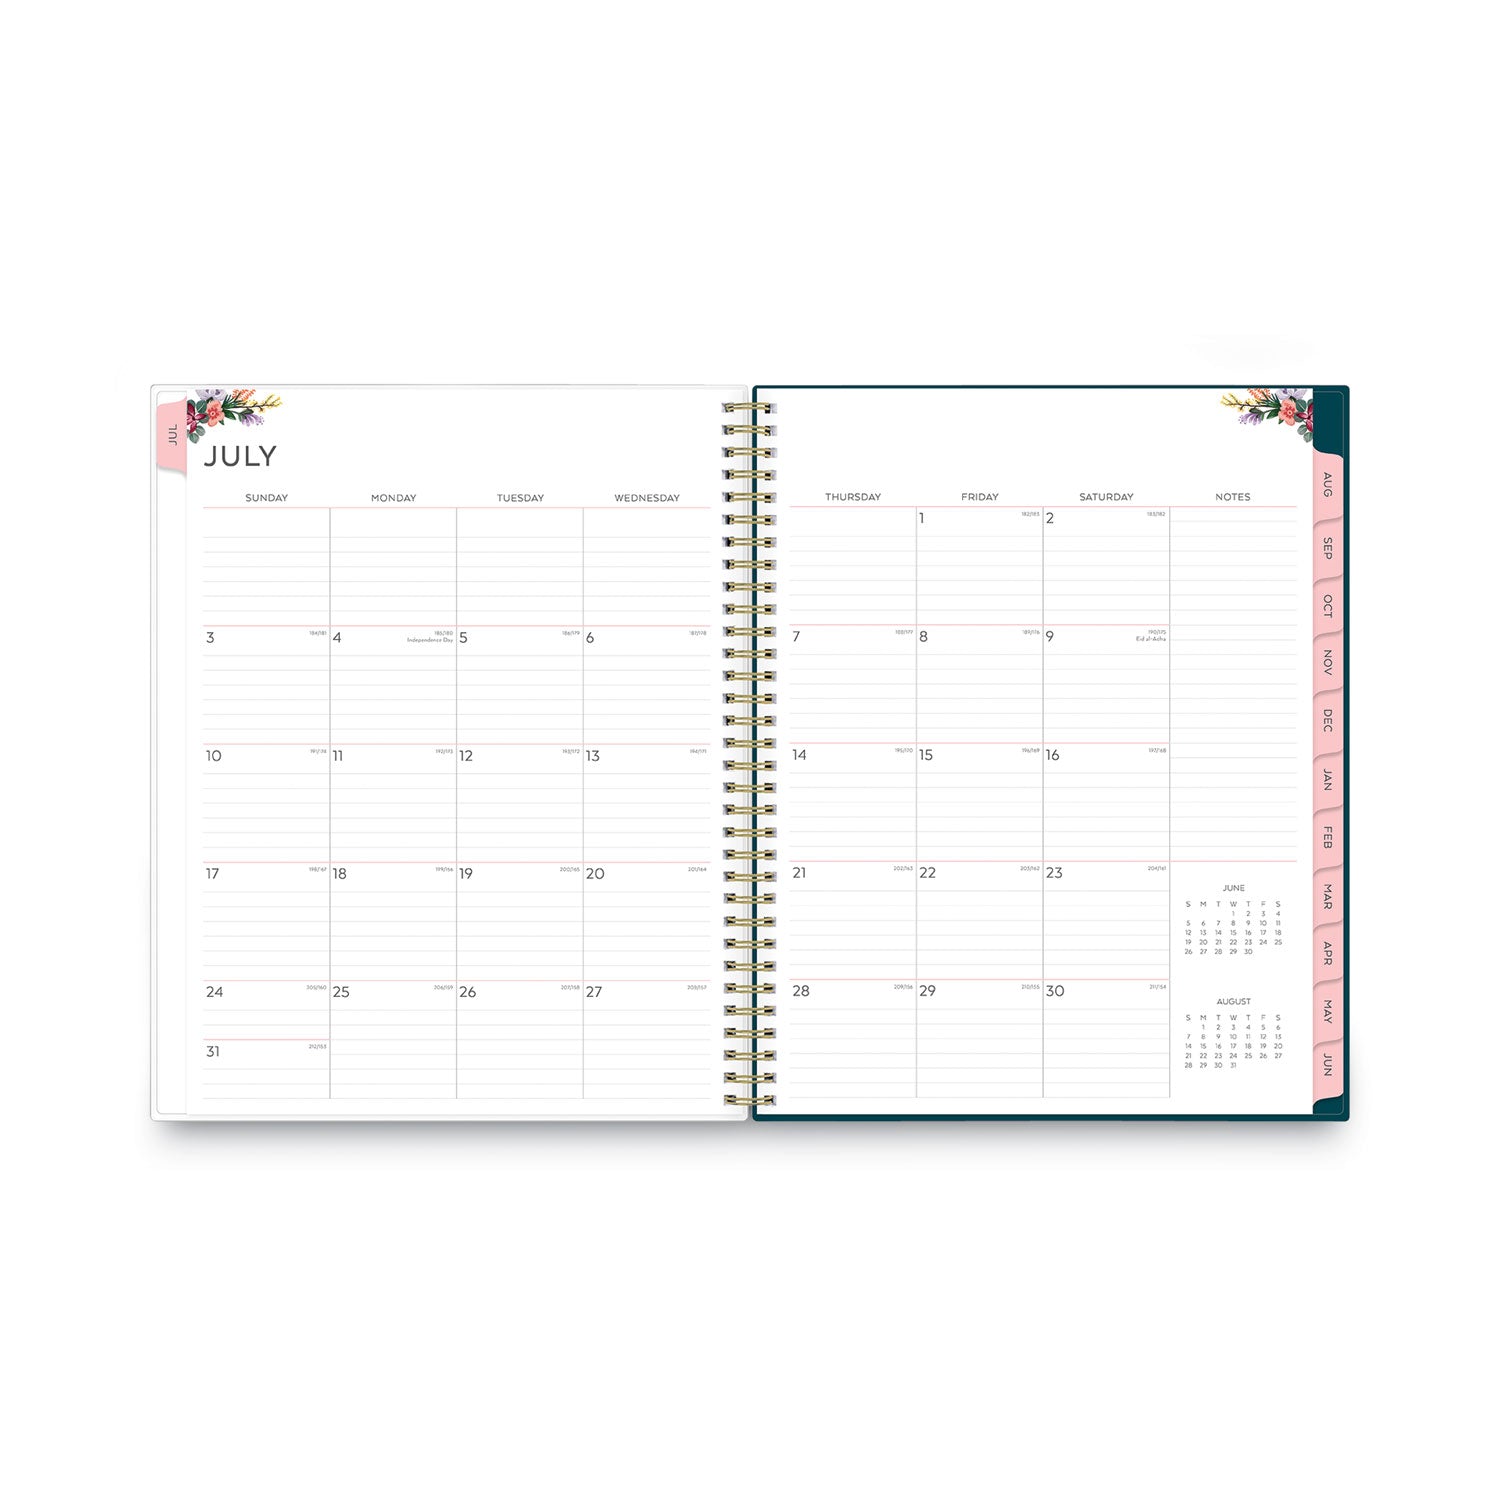 greta-academic-year-weekly-monthly-planner-greta-floral-artwork-115-x-8-green-cover-12-month-july-june-2022-2023_bls136479 - 4